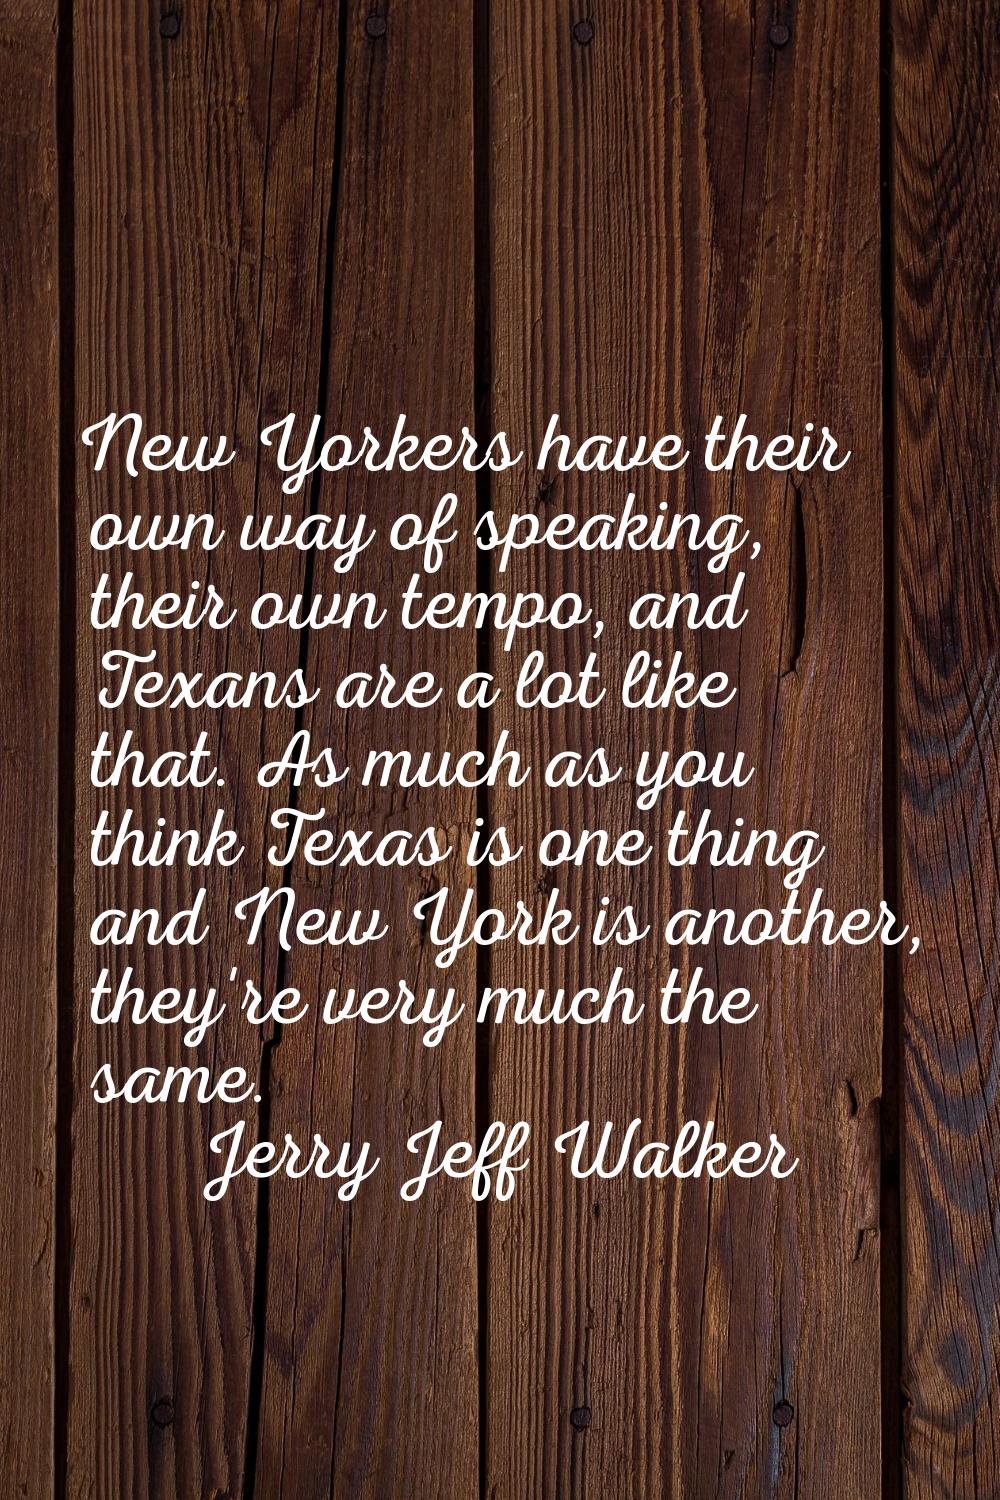 New Yorkers have their own way of speaking, their own tempo, and Texans are a lot like that. As muc